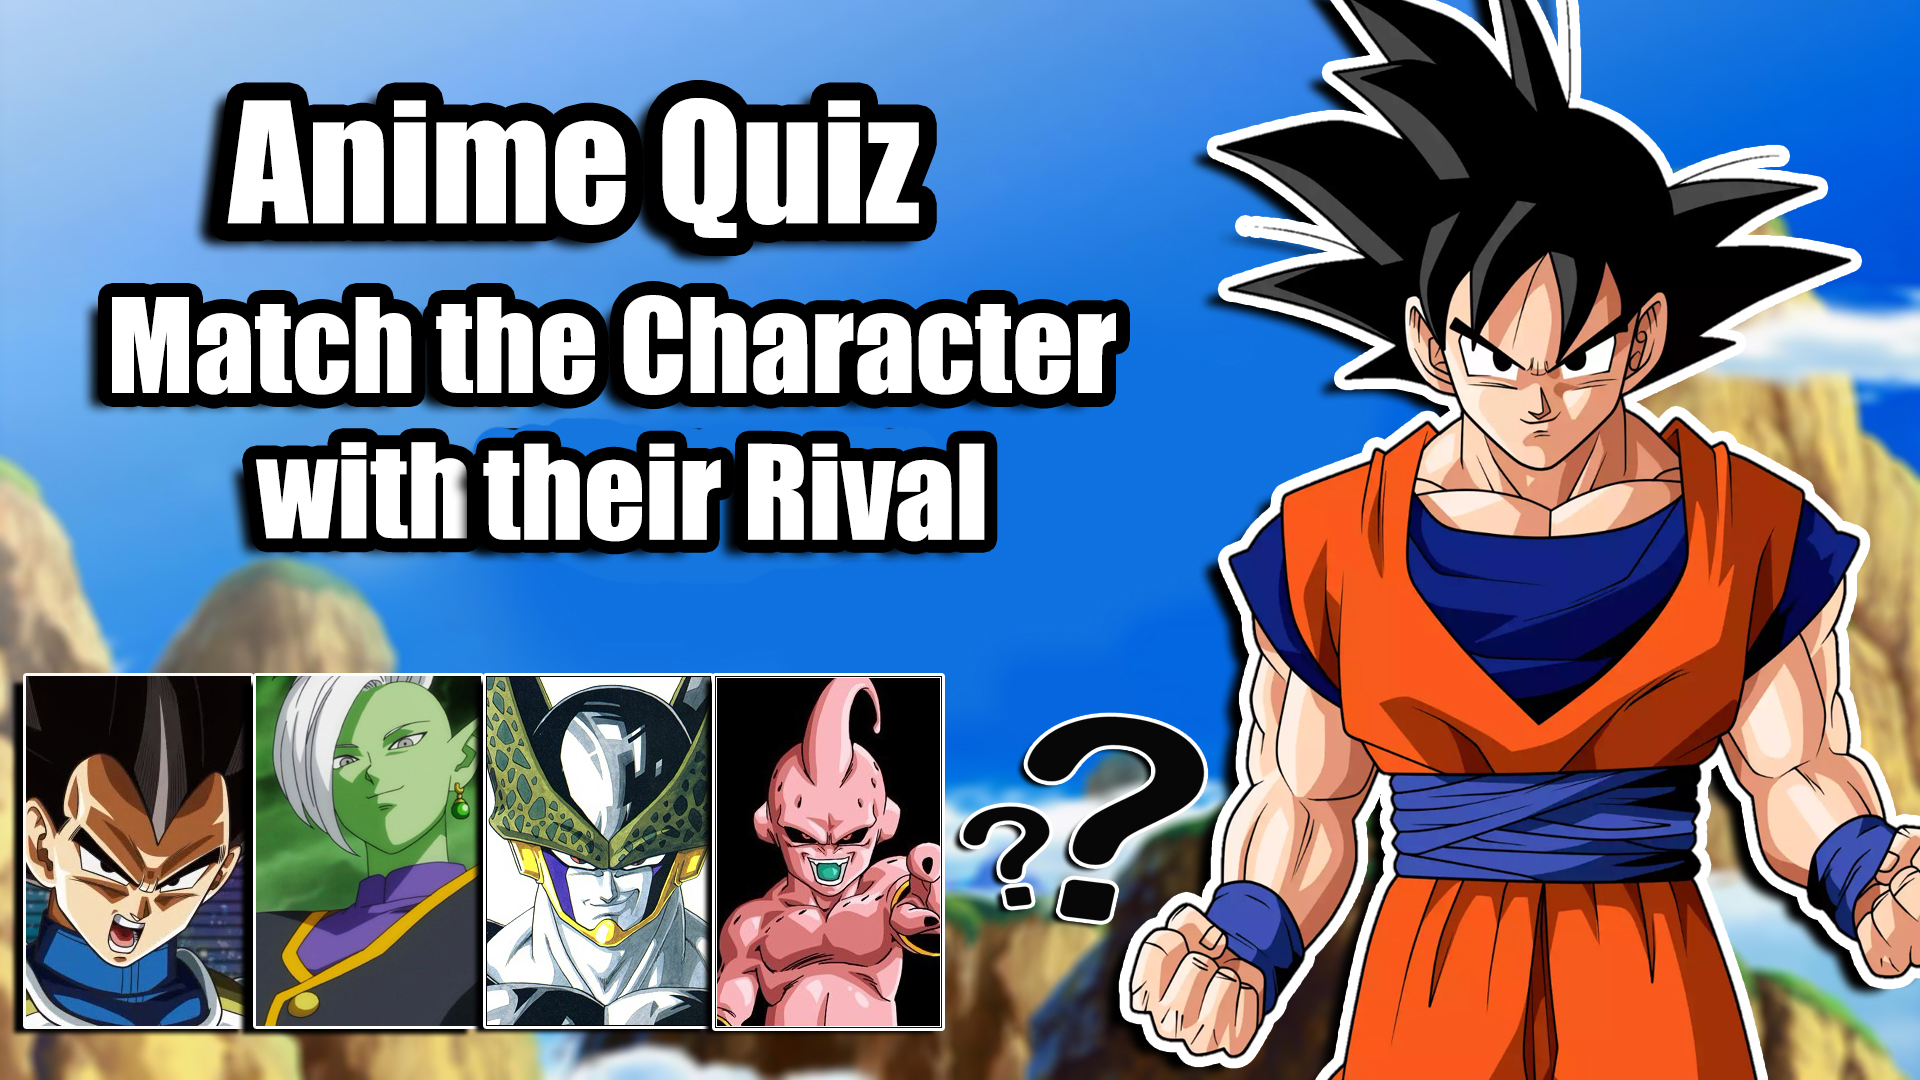 Anime Quiz: Match the Character with their Rival